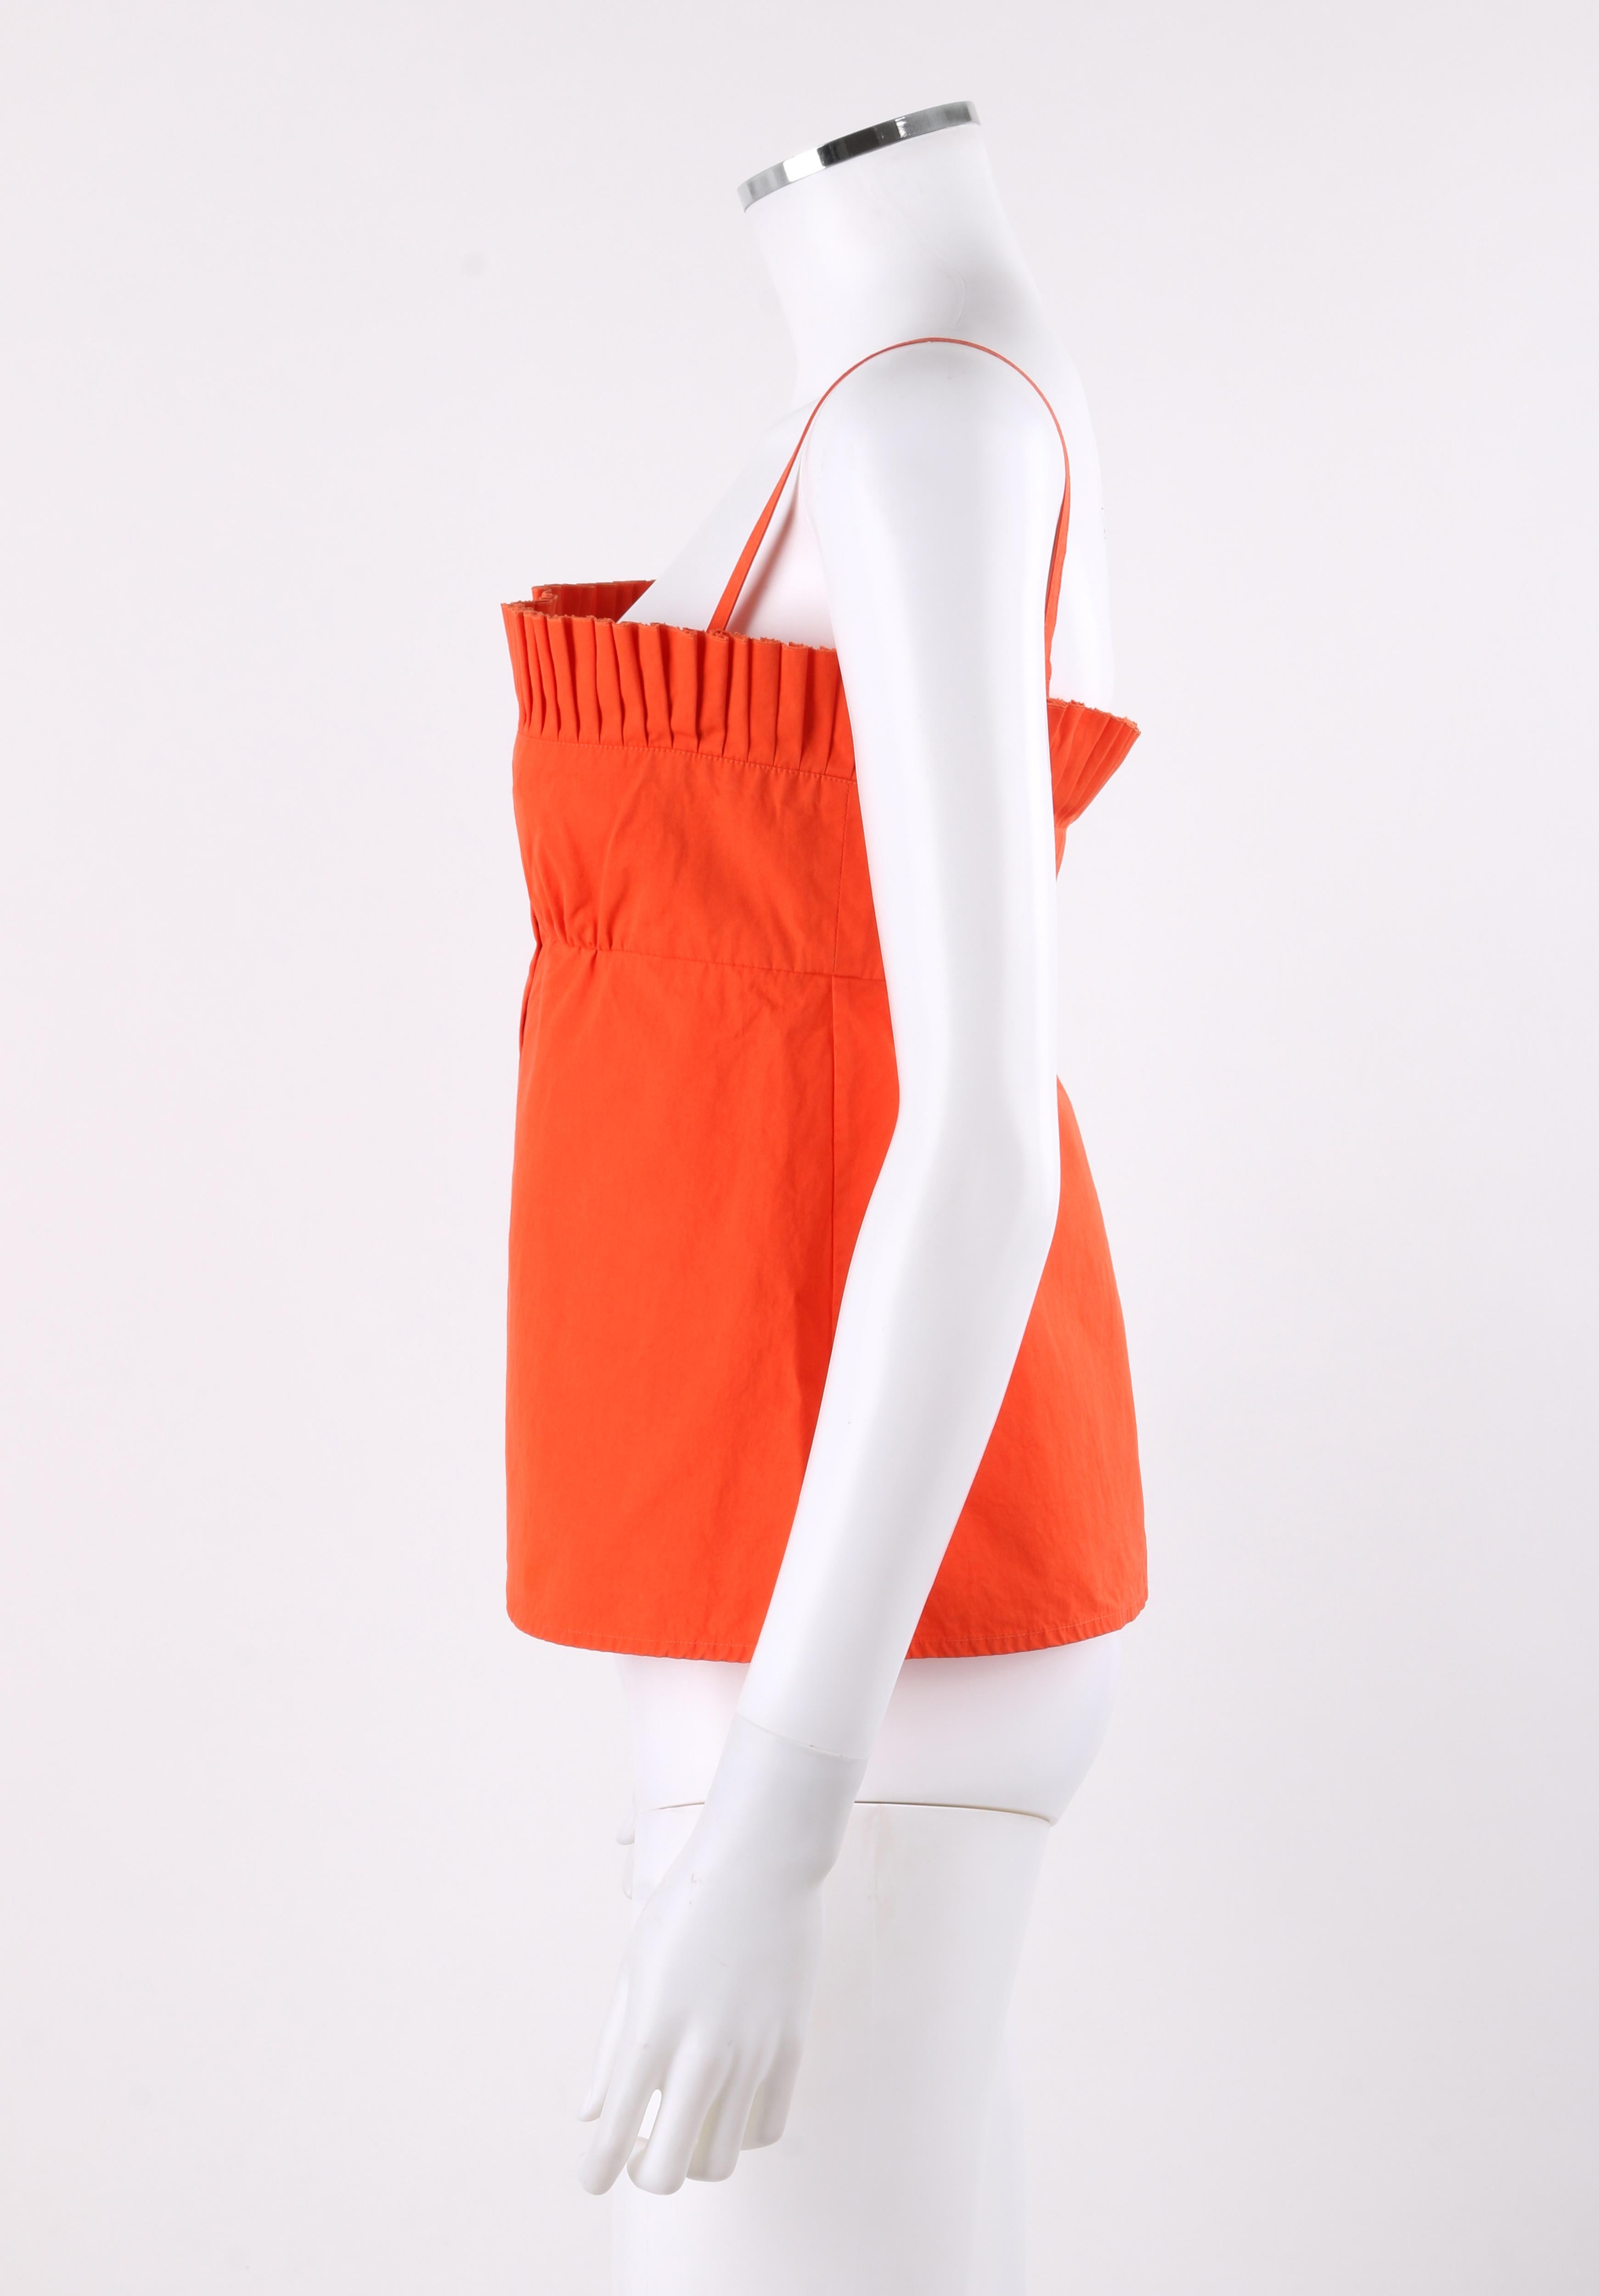 LOUIS VUITTON S/S 2003 Orange Knife Pleated Button Down Tank Top In Good Condition For Sale In Thiensville, WI